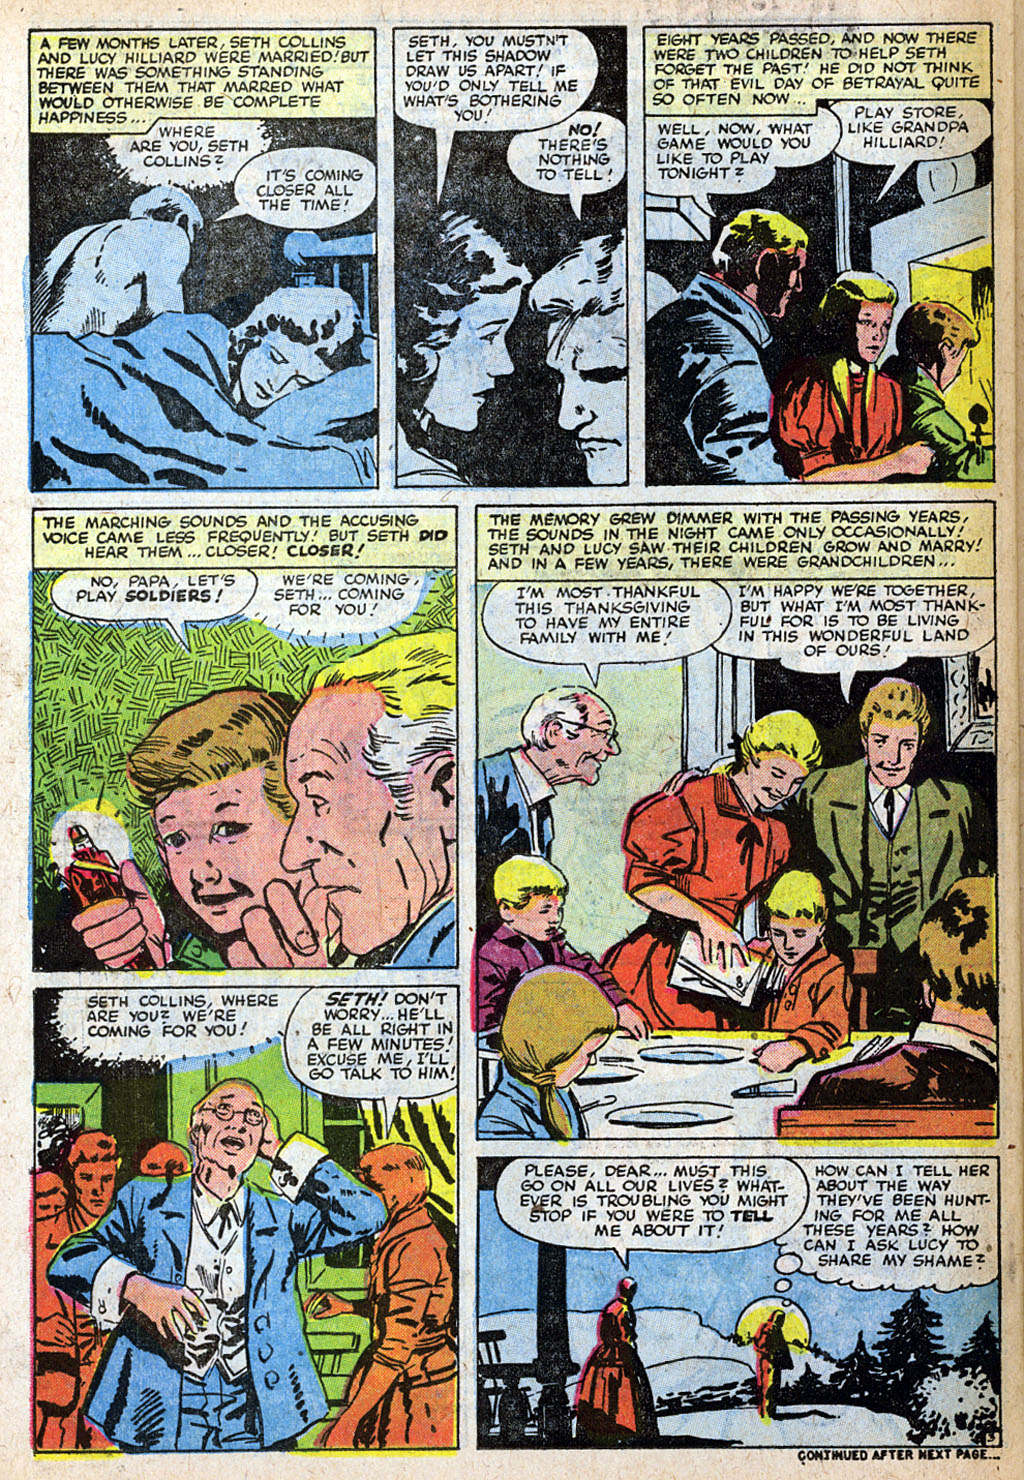 Marvel Tales (1949) 156 Page 25